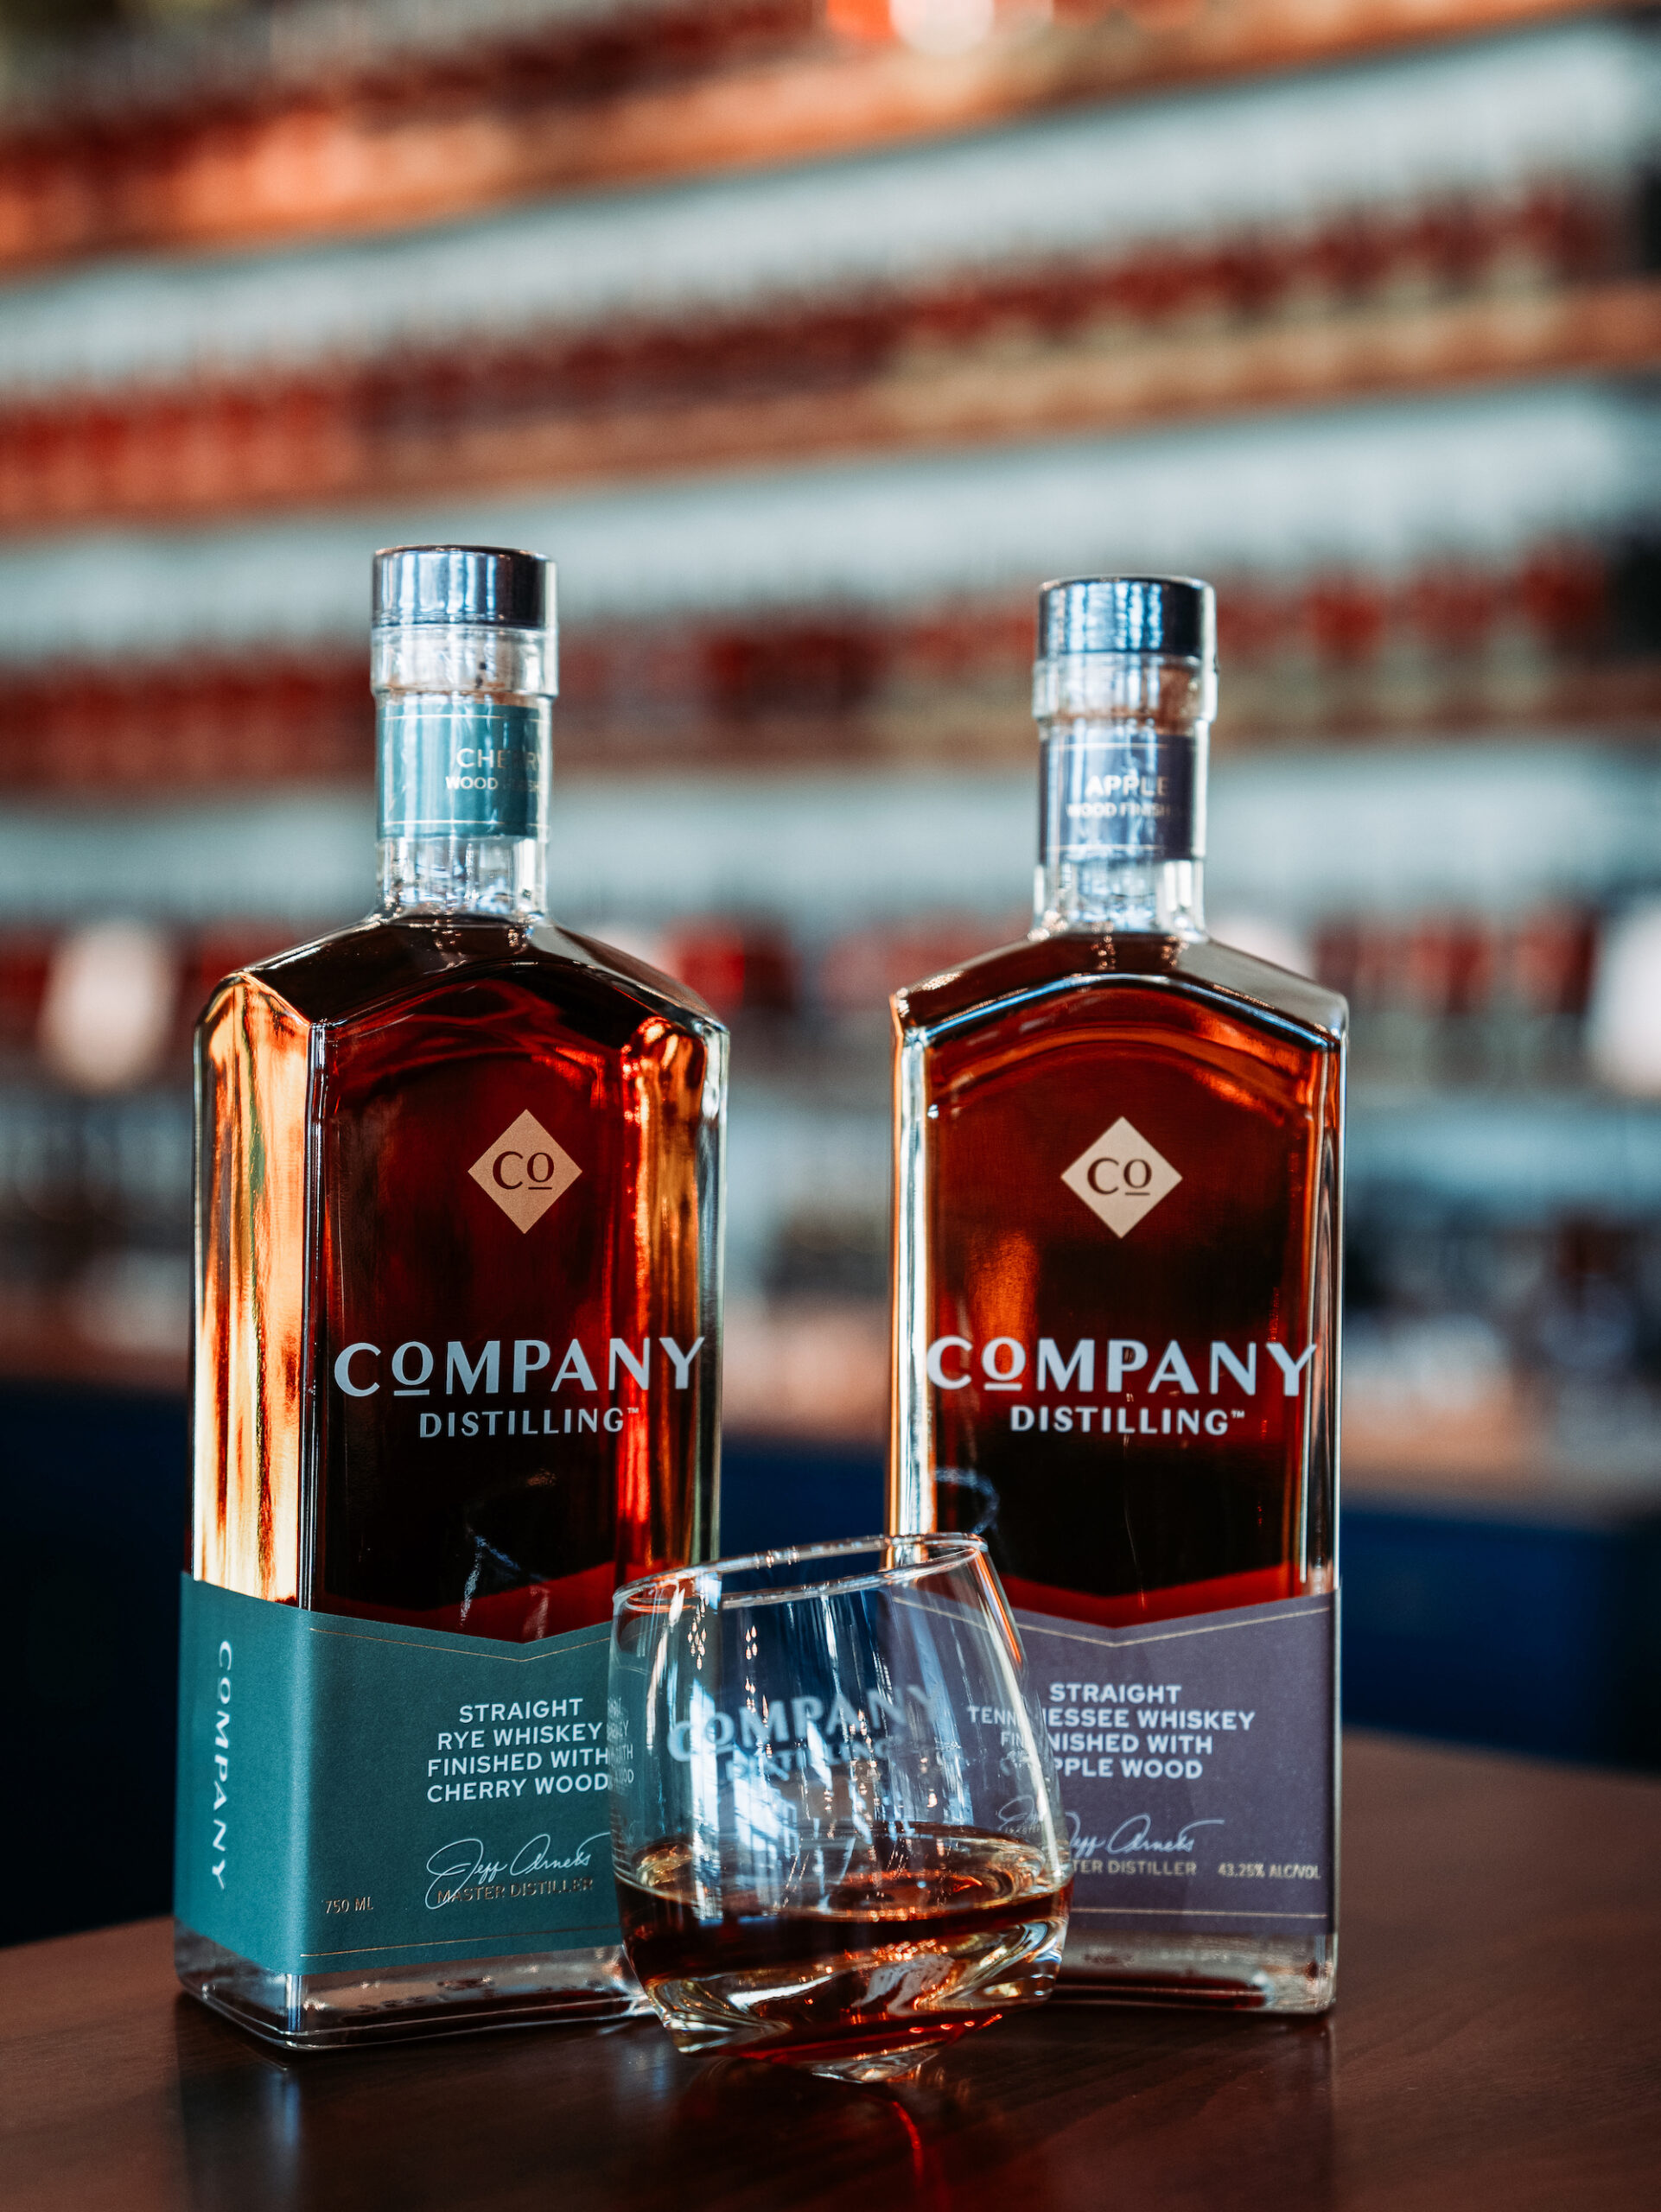 Company Distilling Unveils Two New Whiskies in their Lineup